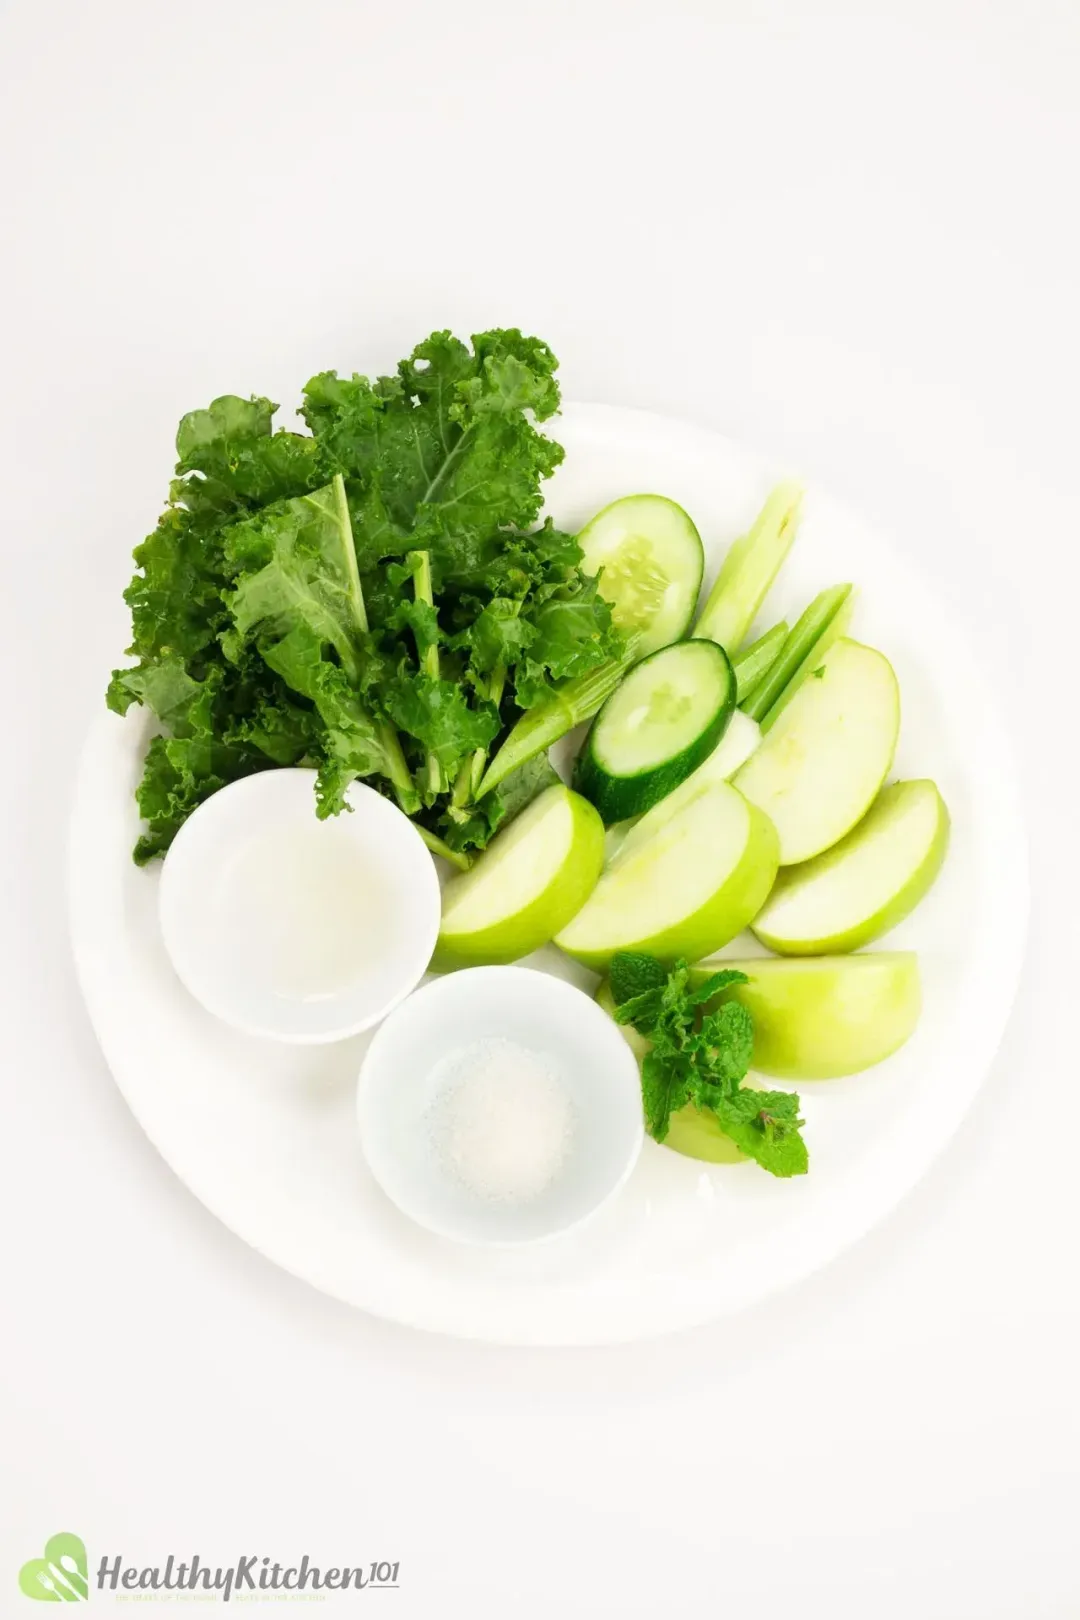 Ingredients of green vegetable juice: kale leaves, celery stalks cut small, cucumber slices, green apple wedges, sugar, lemon juice all placed on a white dish